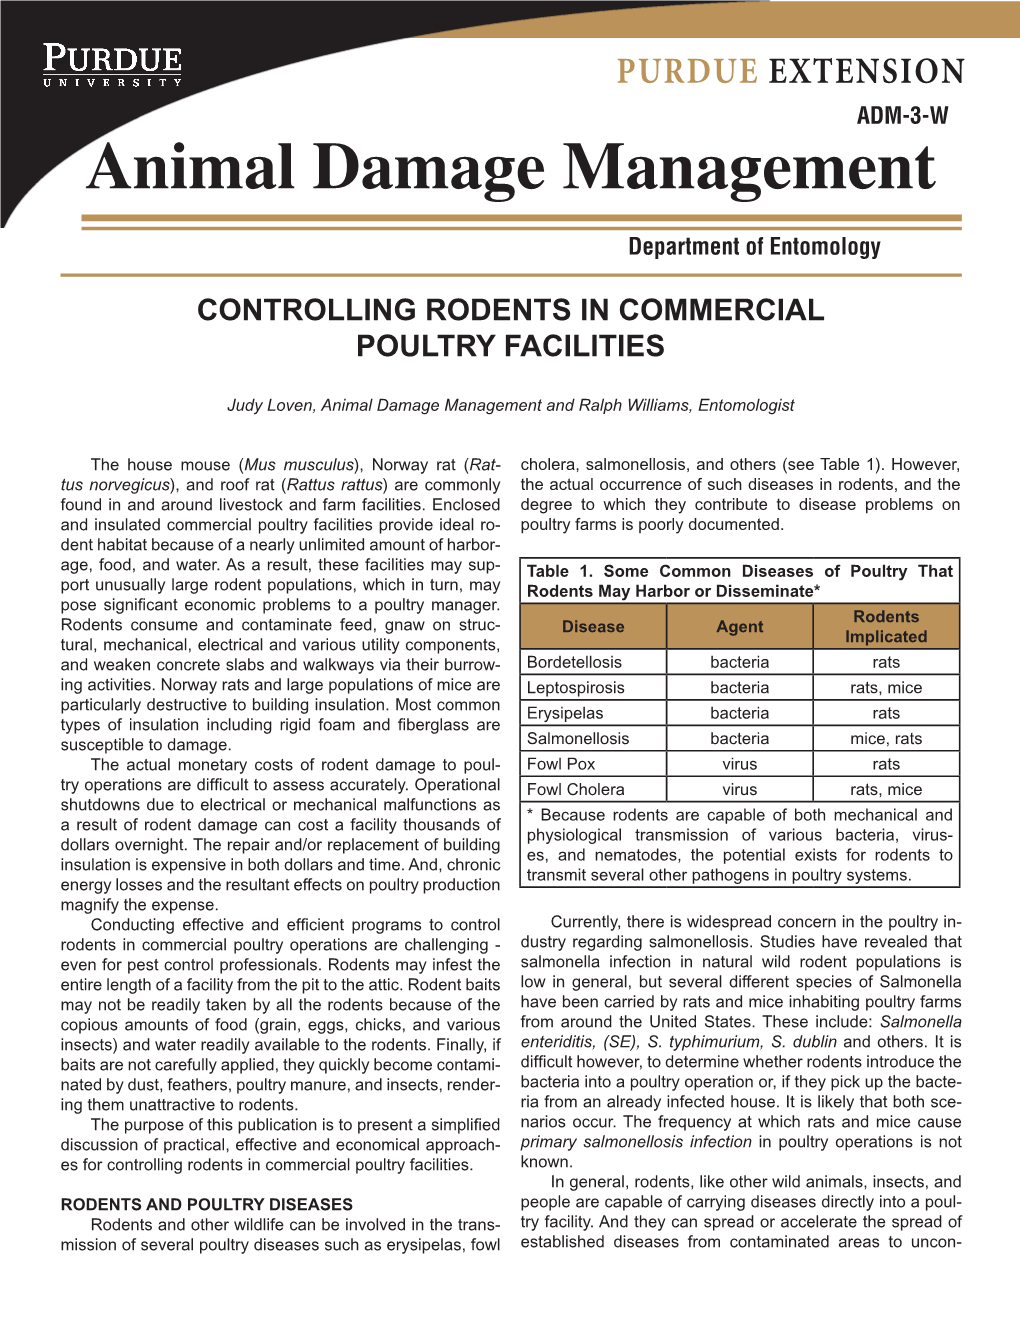 Controlling Rodents in Commercial Poultry Facilities